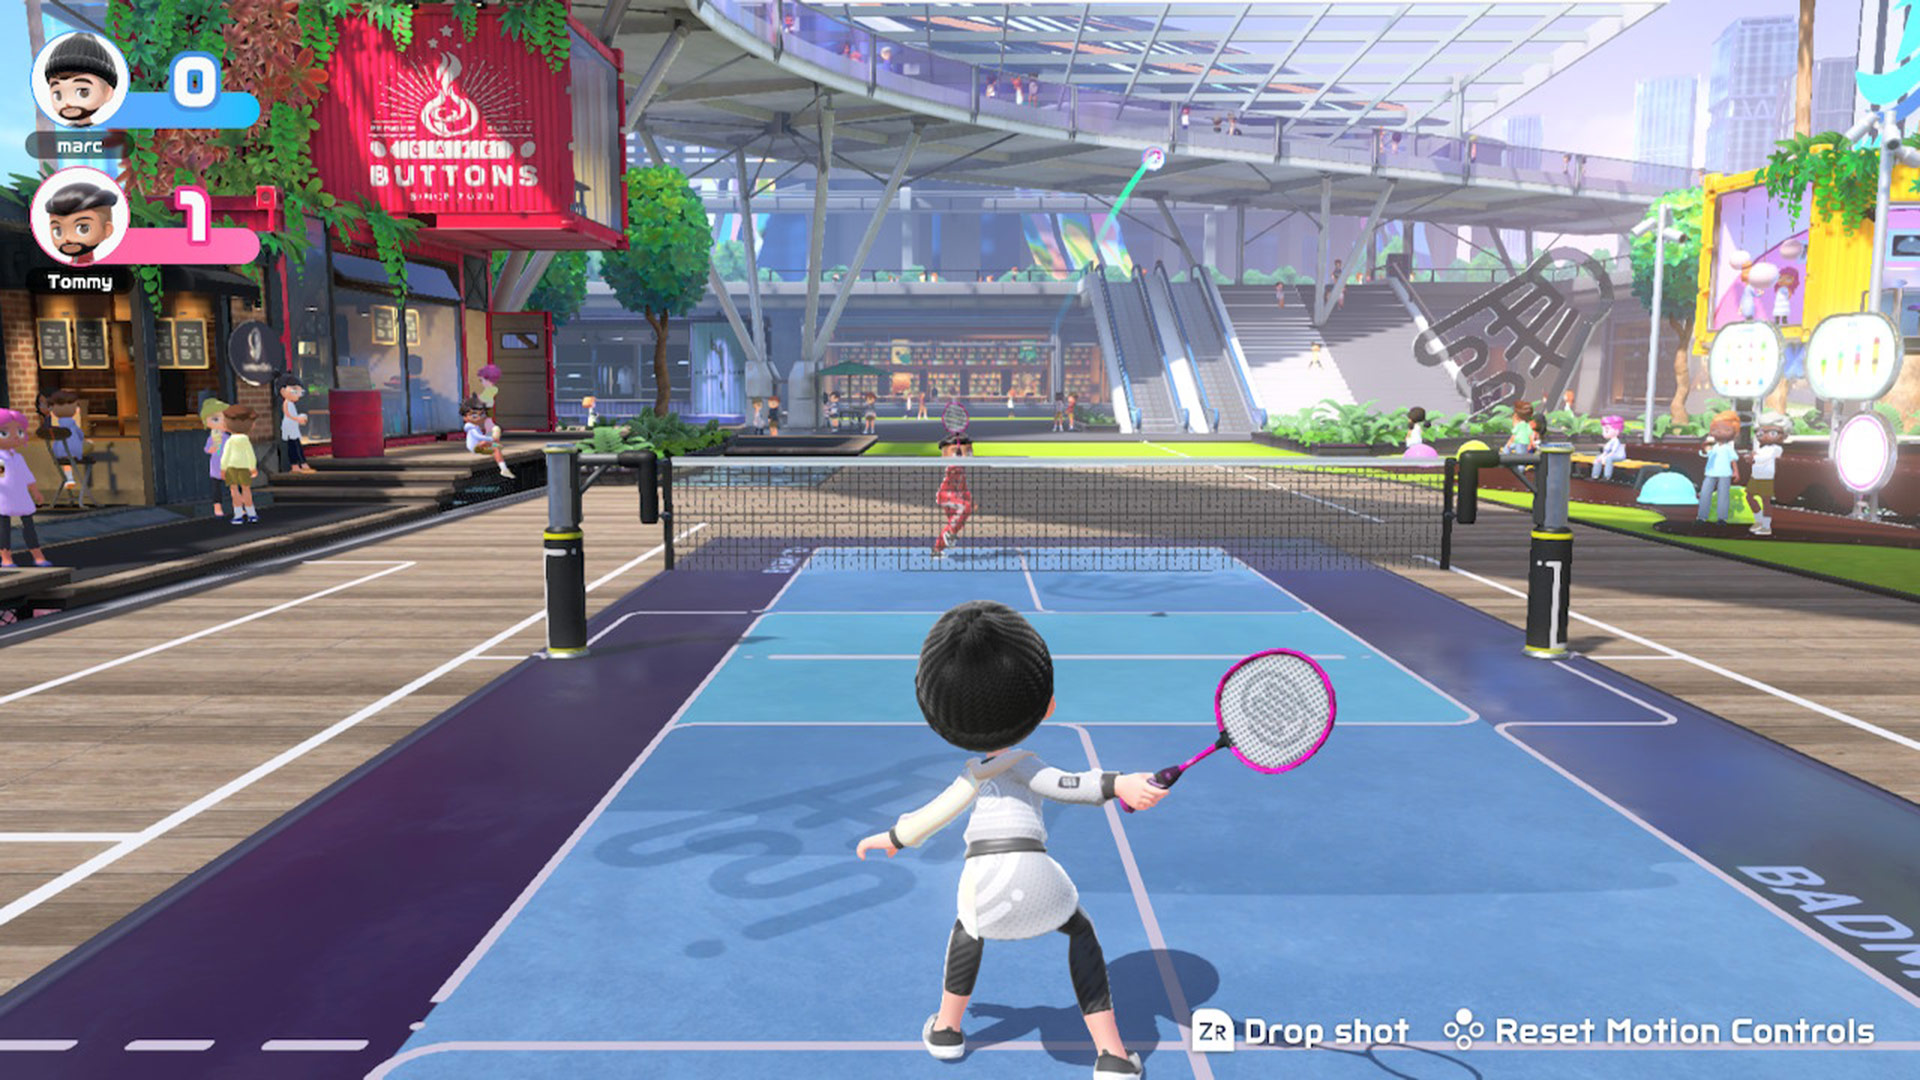 A screen from Nintendo Switch Sports showing the badminton mini-game